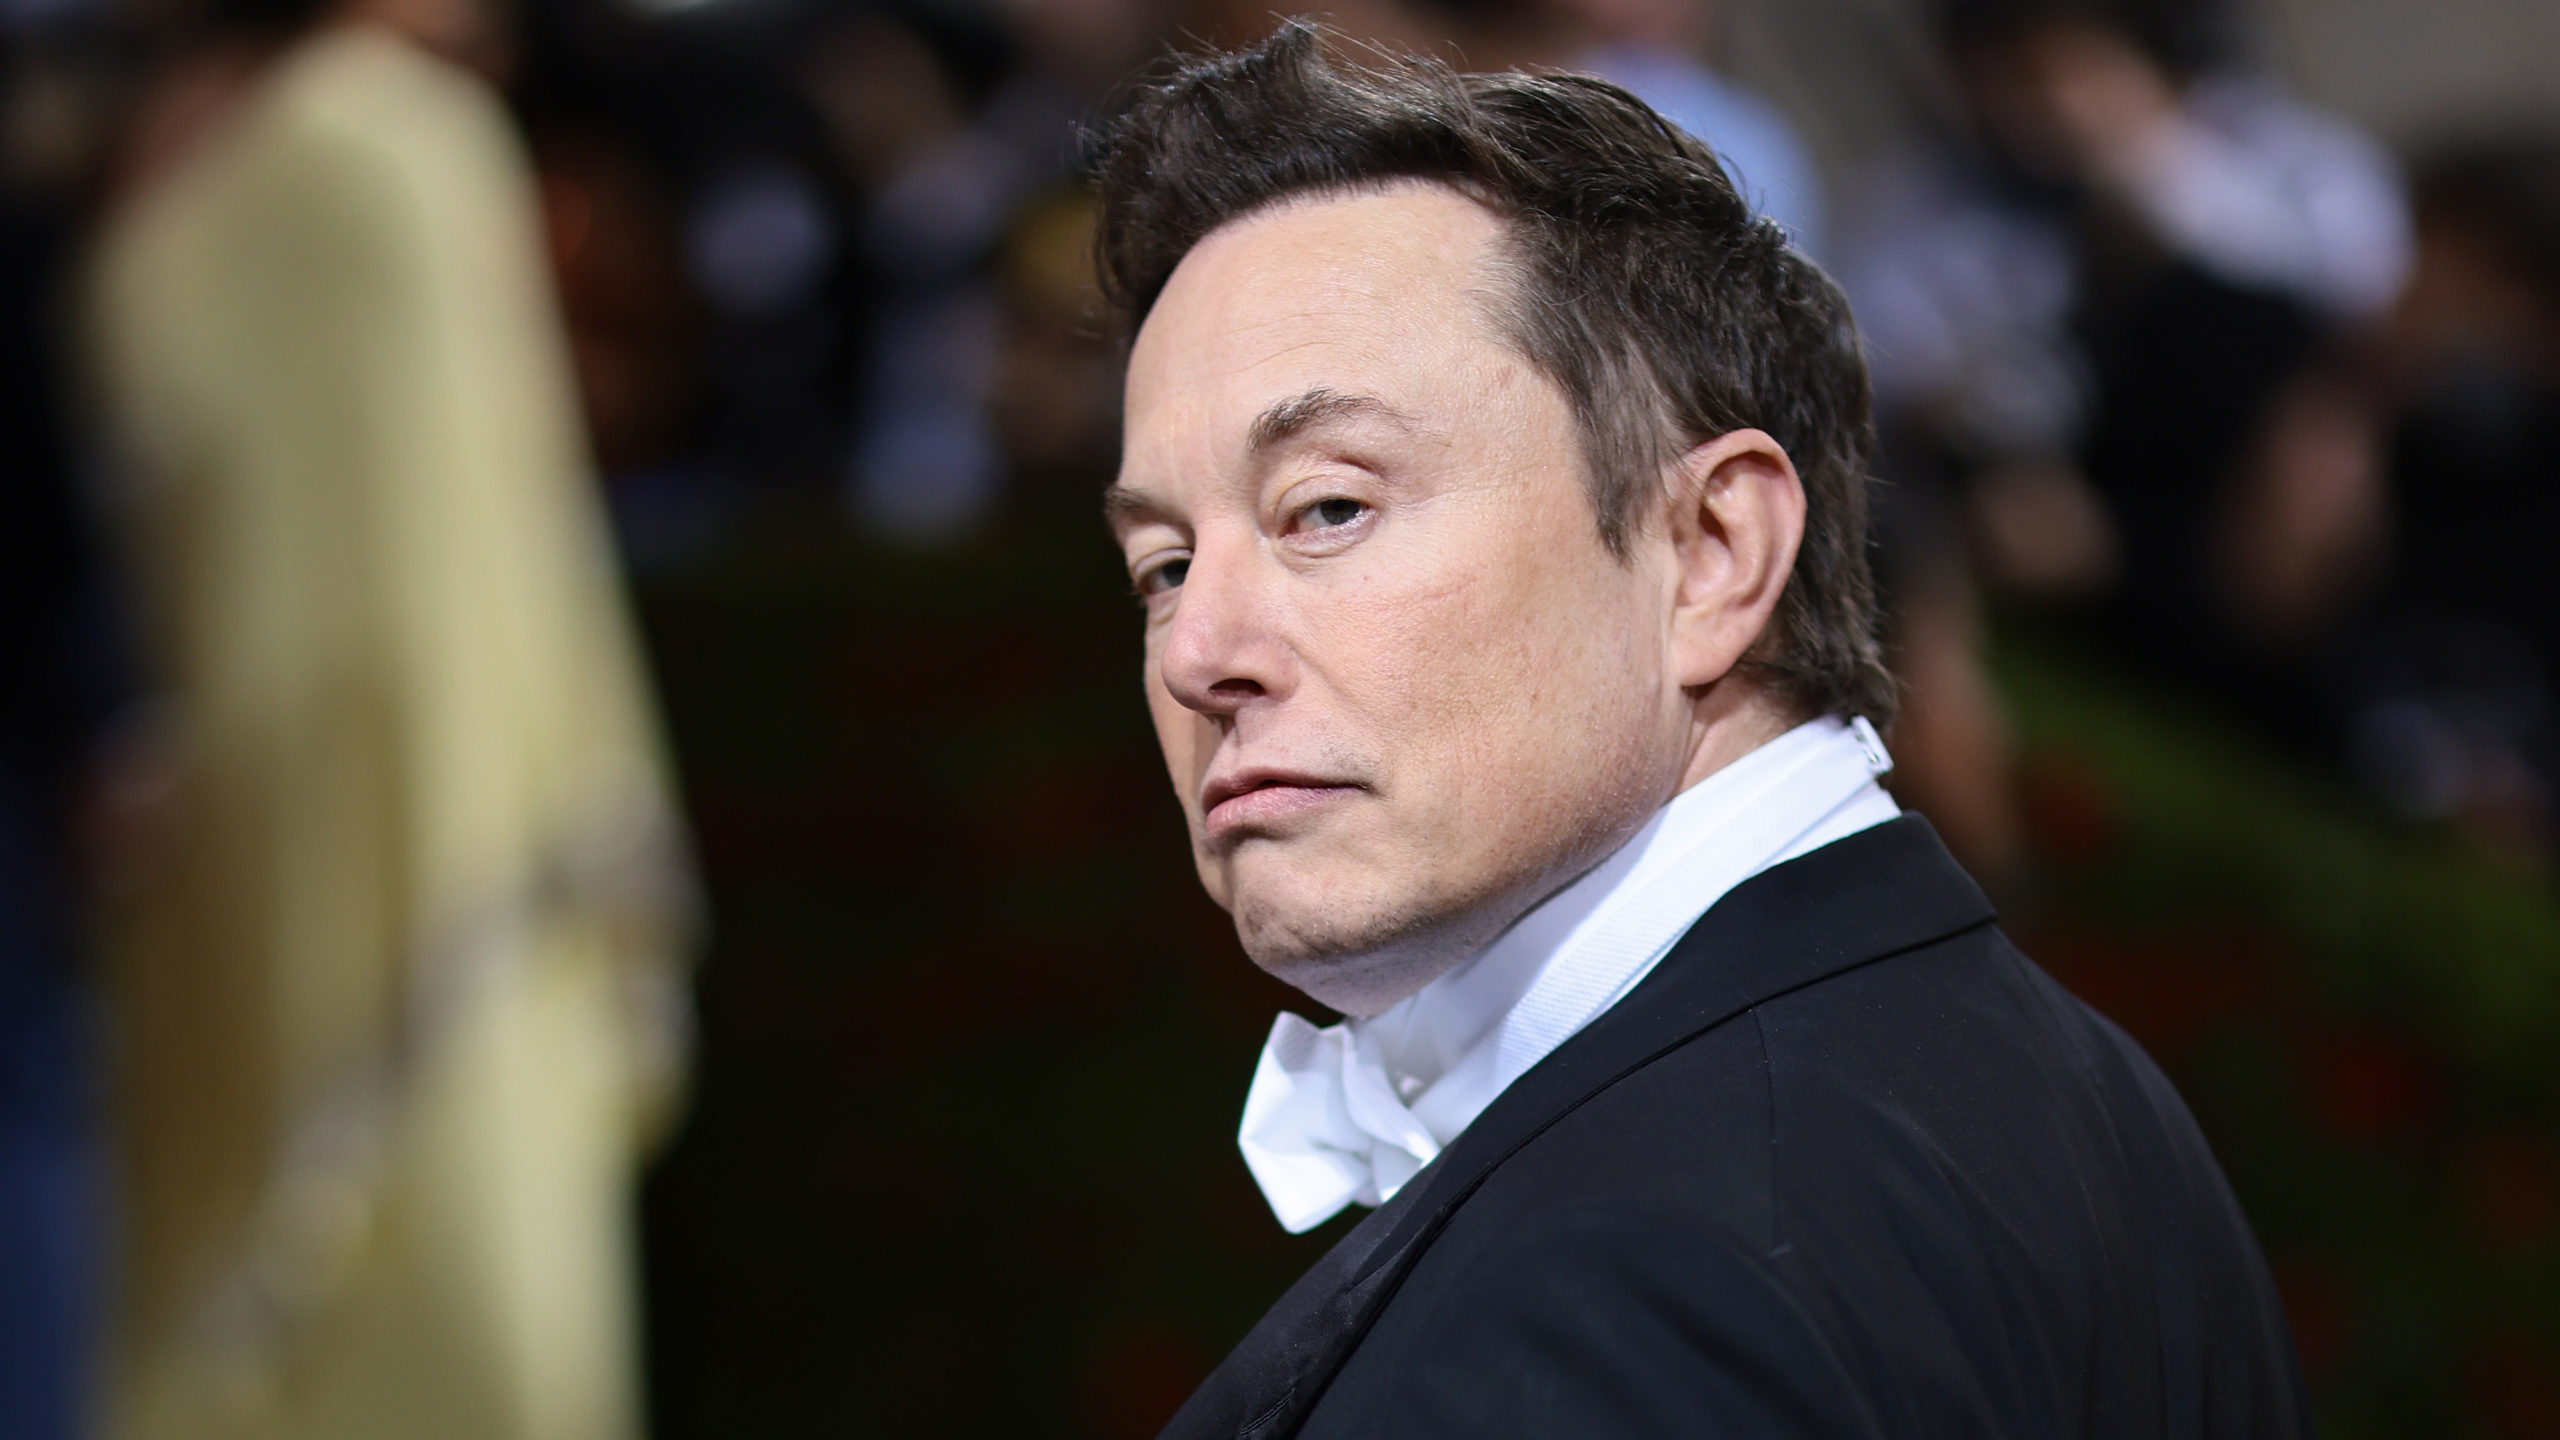 Elon Musk, seen here on May 2 in New York, has completed his $44 billion deal to buy Twitter. Photo...